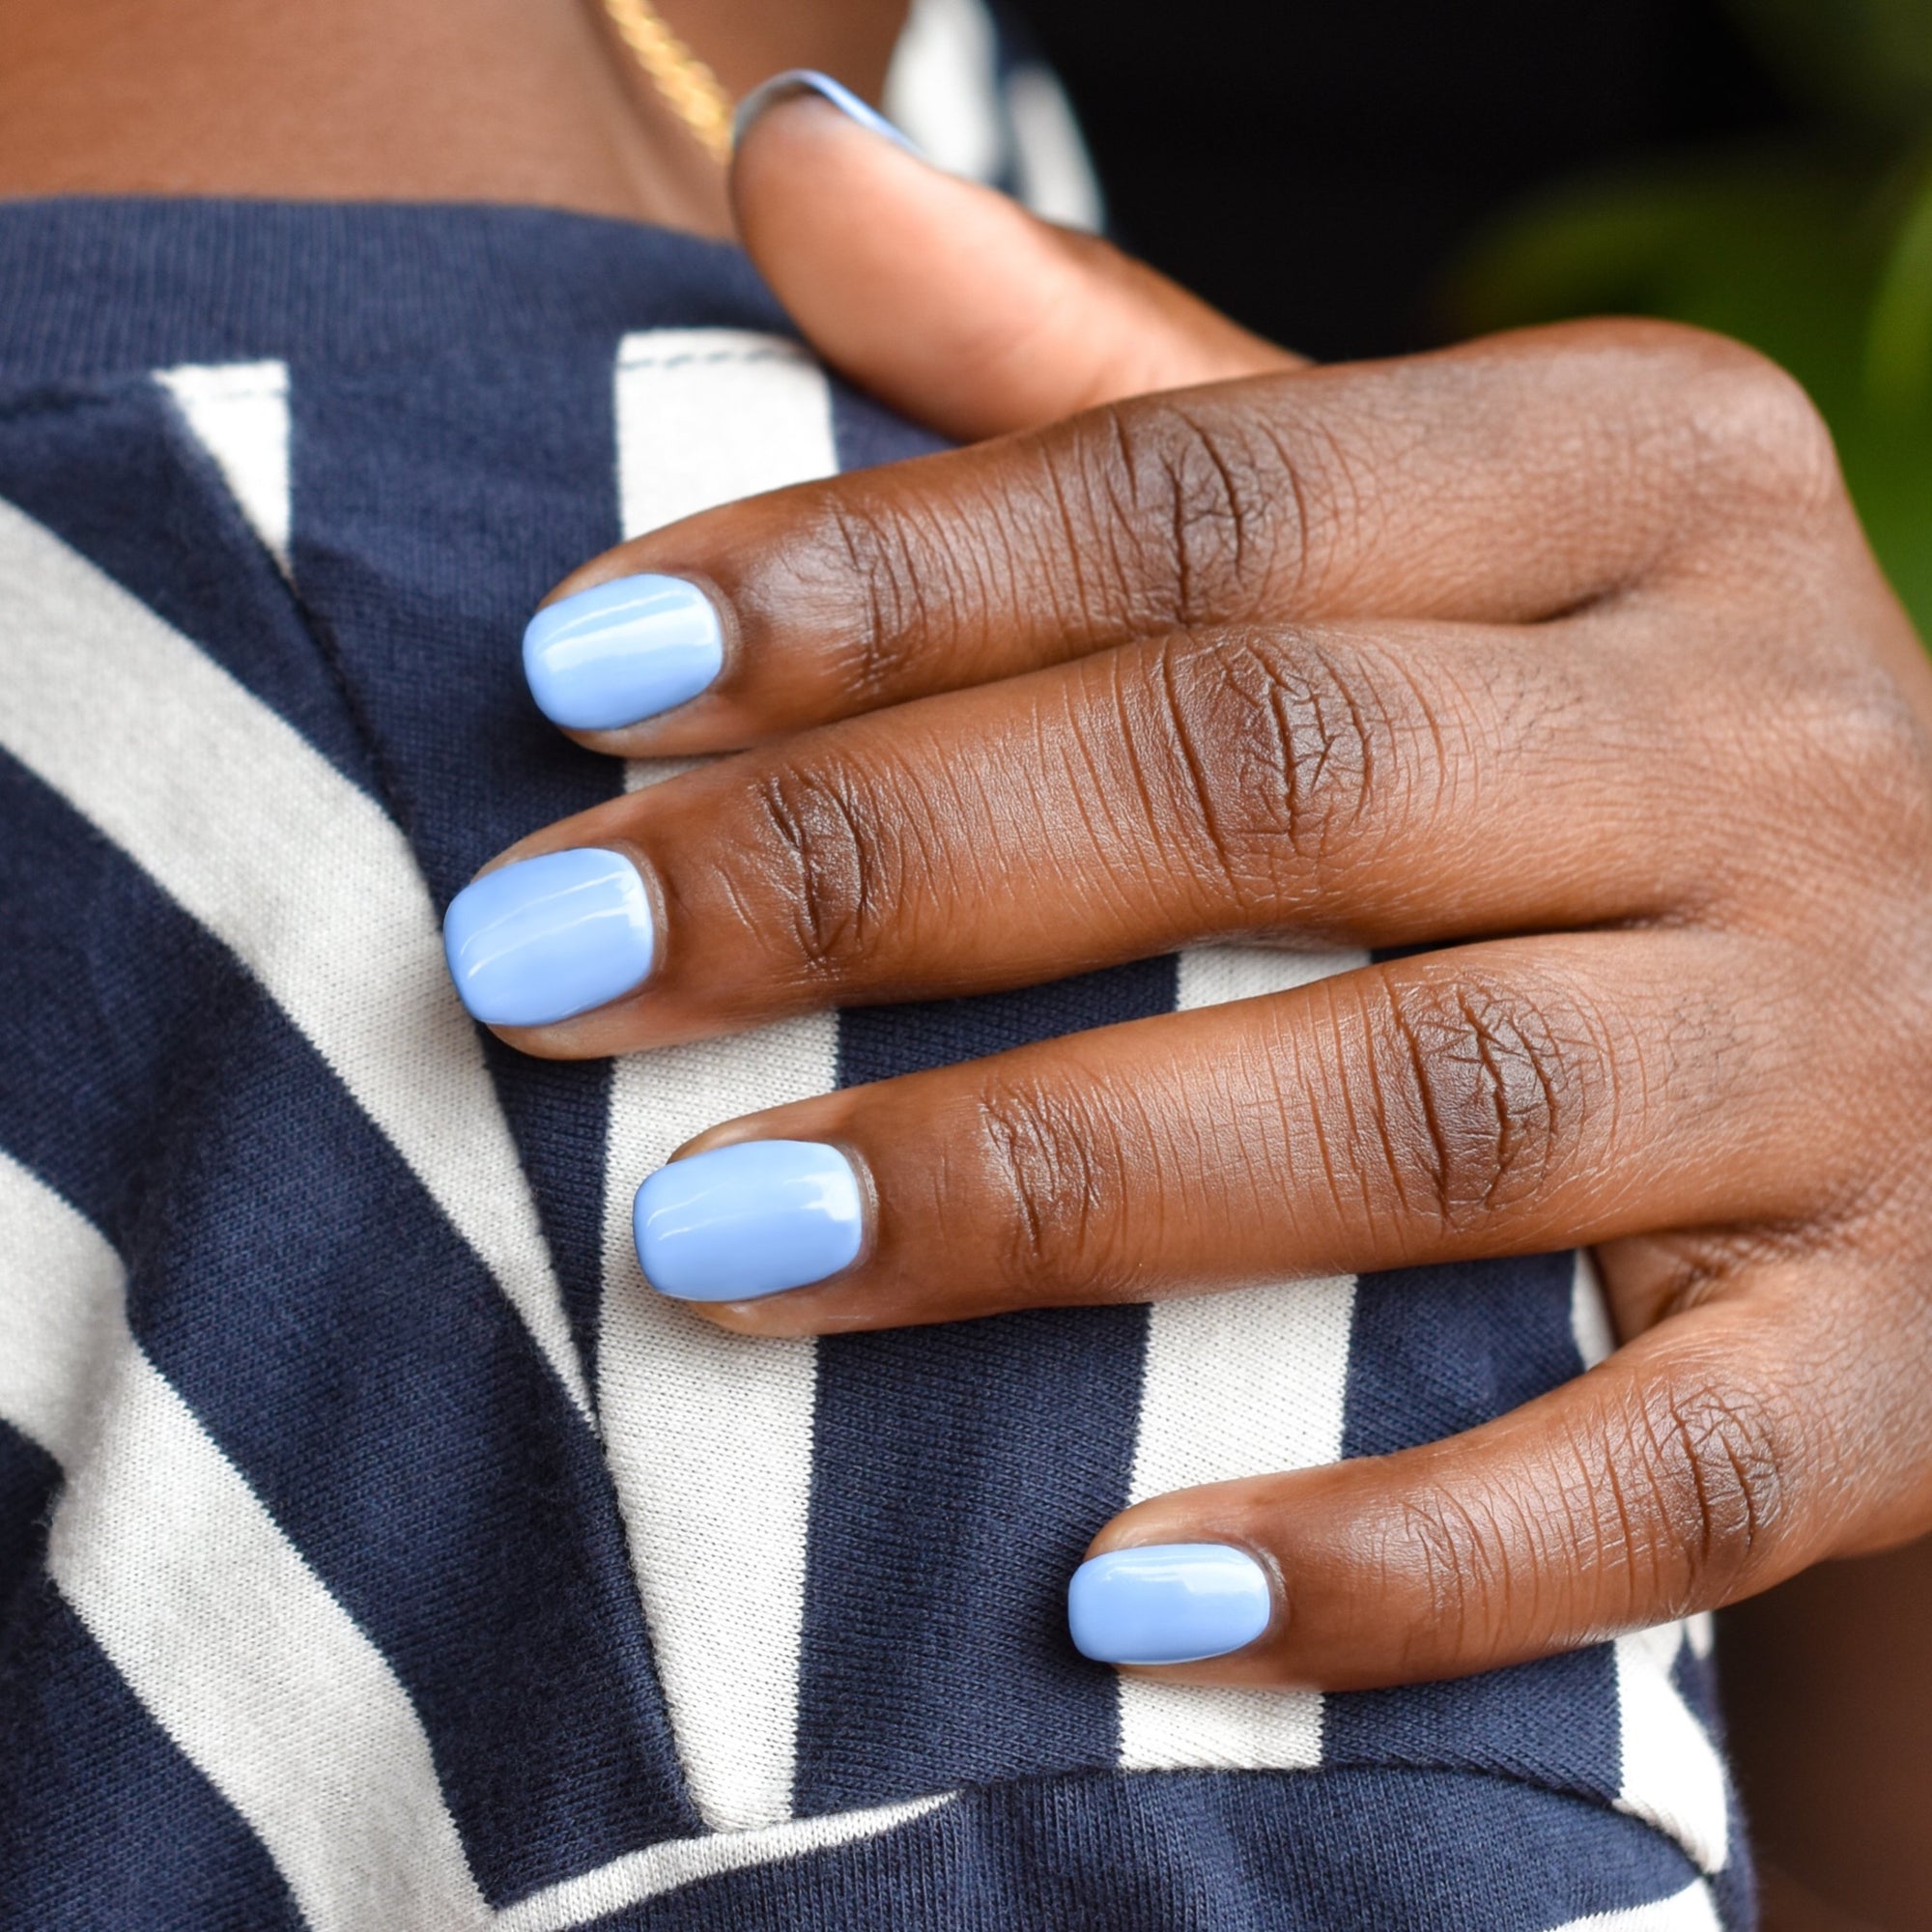 A close up of a hand on a shoulder wearing So Fly nail polish from Hello Birdie which is a sky blue color. The hand rests on a navy and white striped shirt and greenery is out of focus in the background.